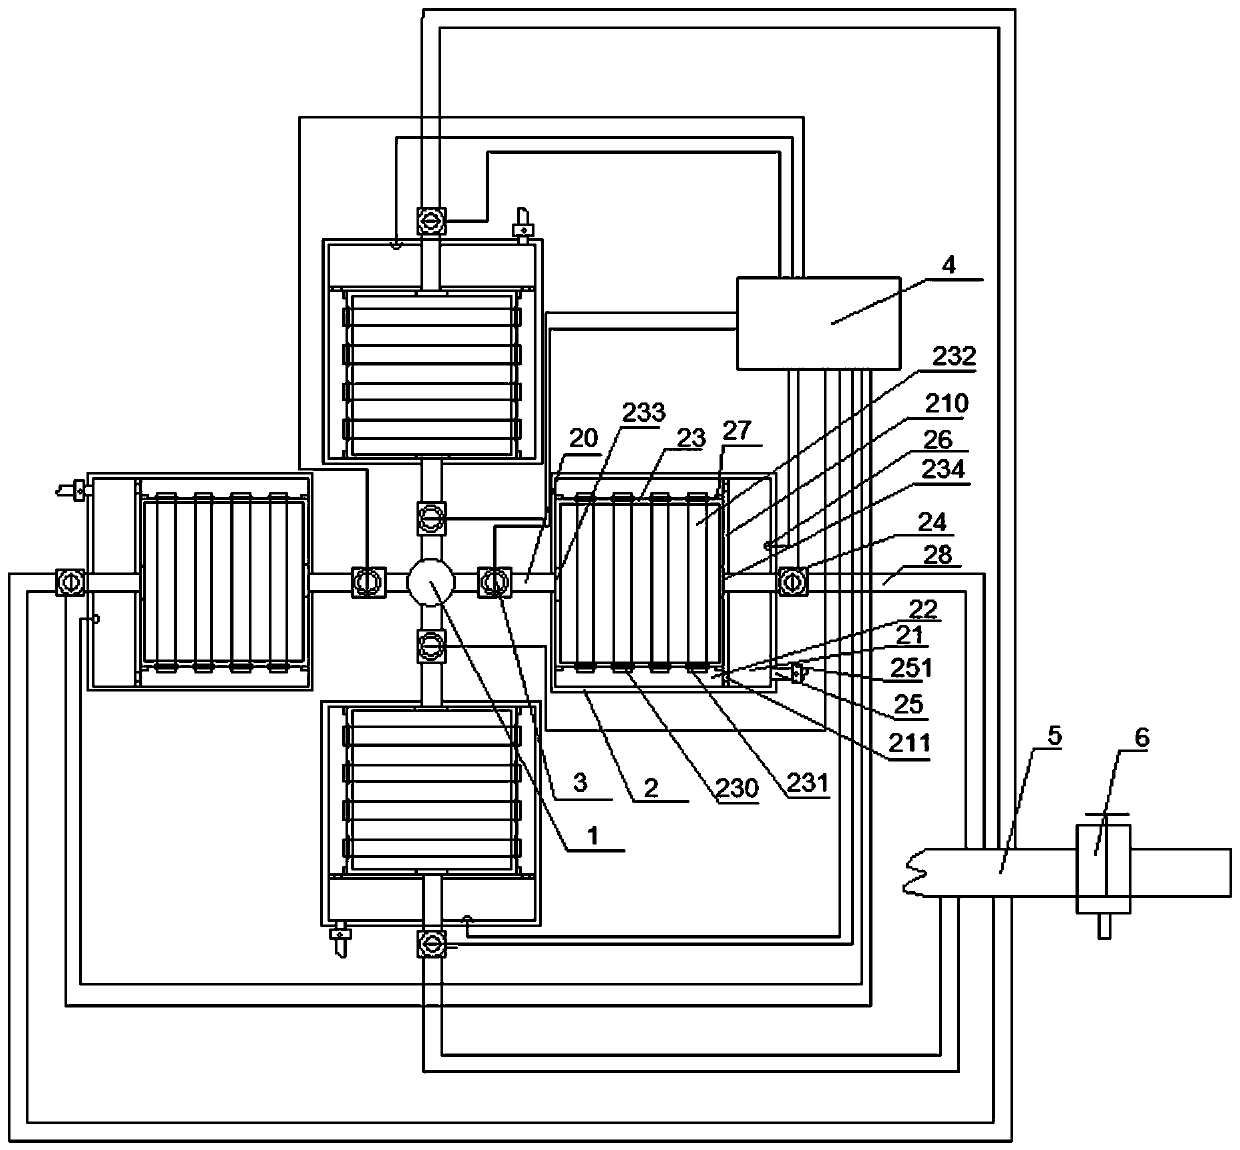 Concentration device for colloidal solution